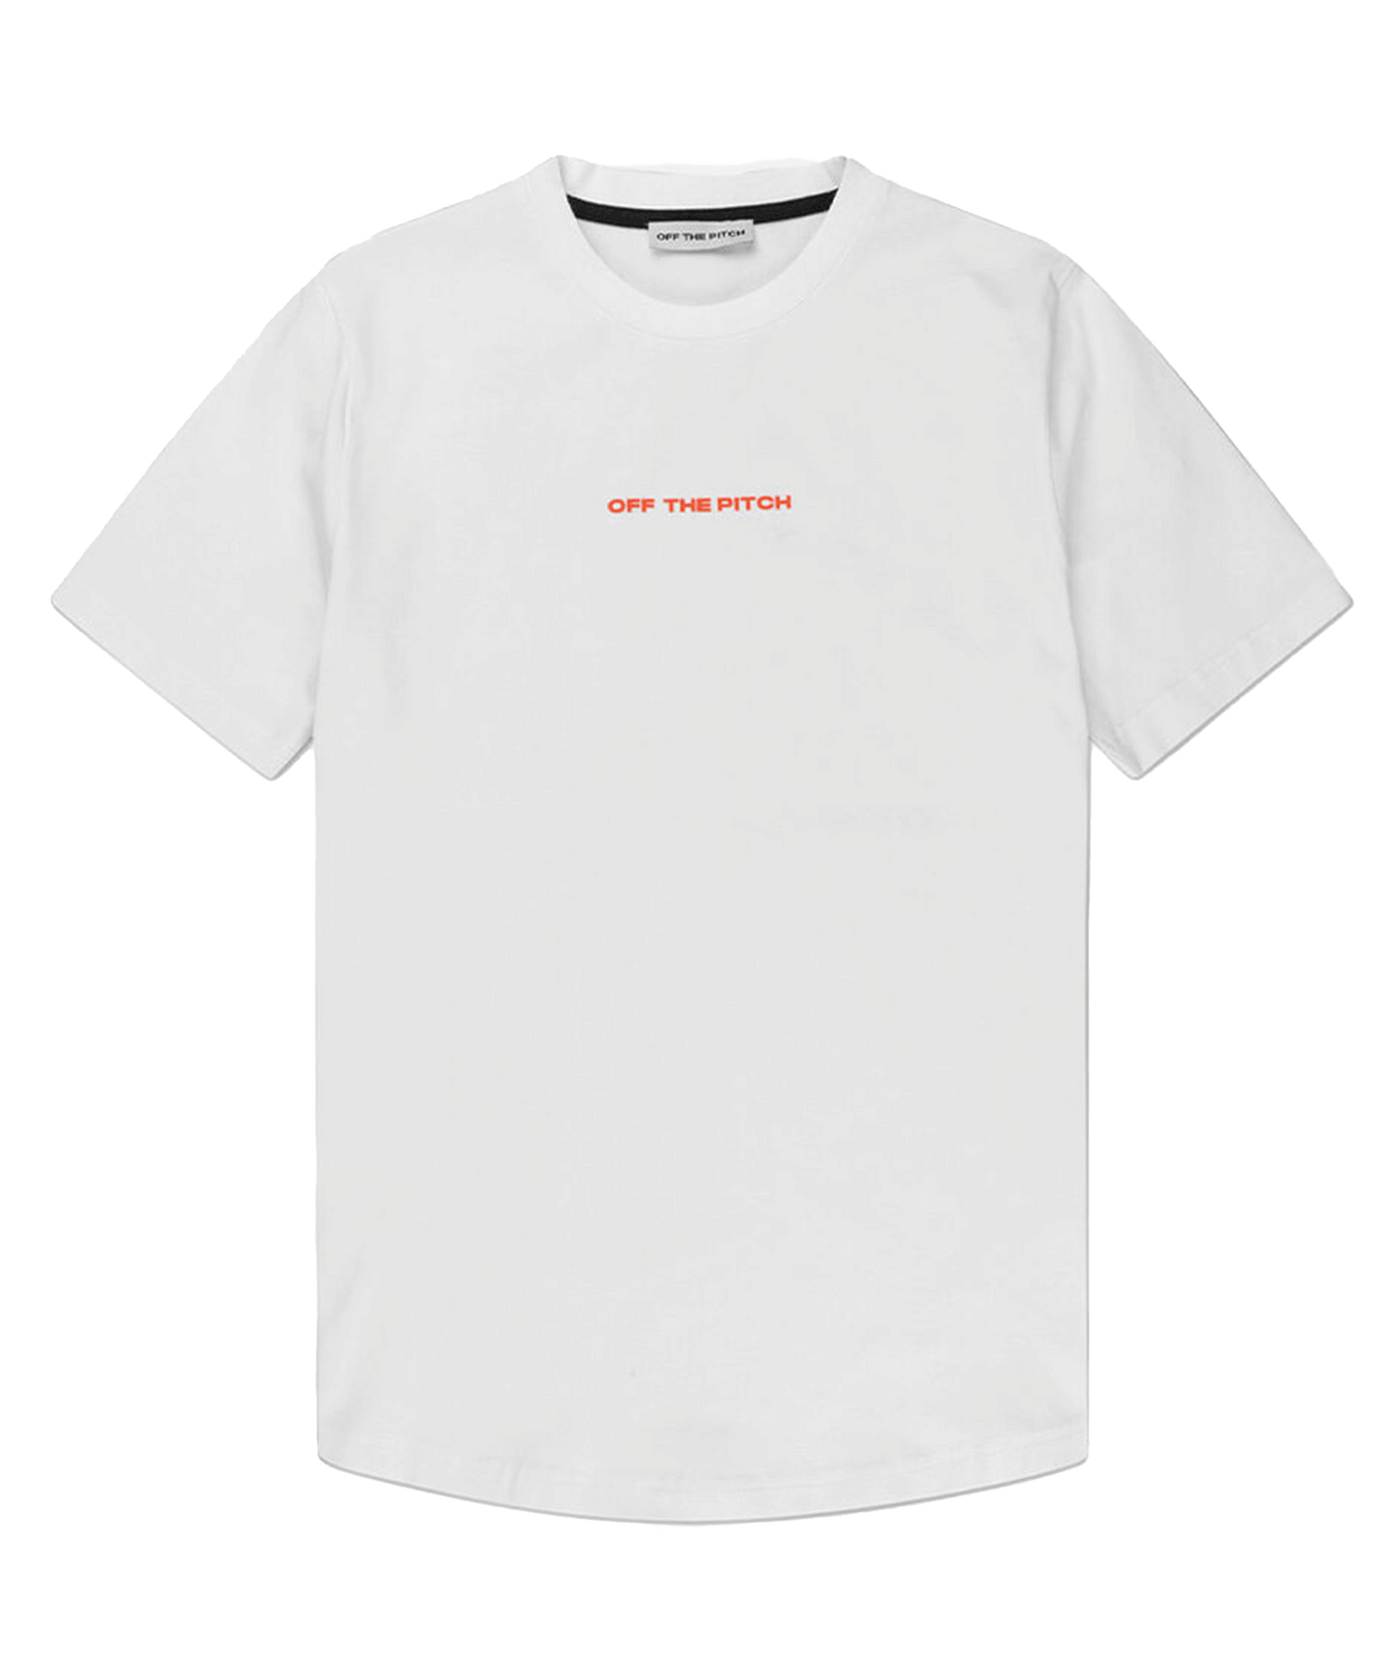 Off The Pitch - Otp241056 - Duplicate T-shirt - 100 White